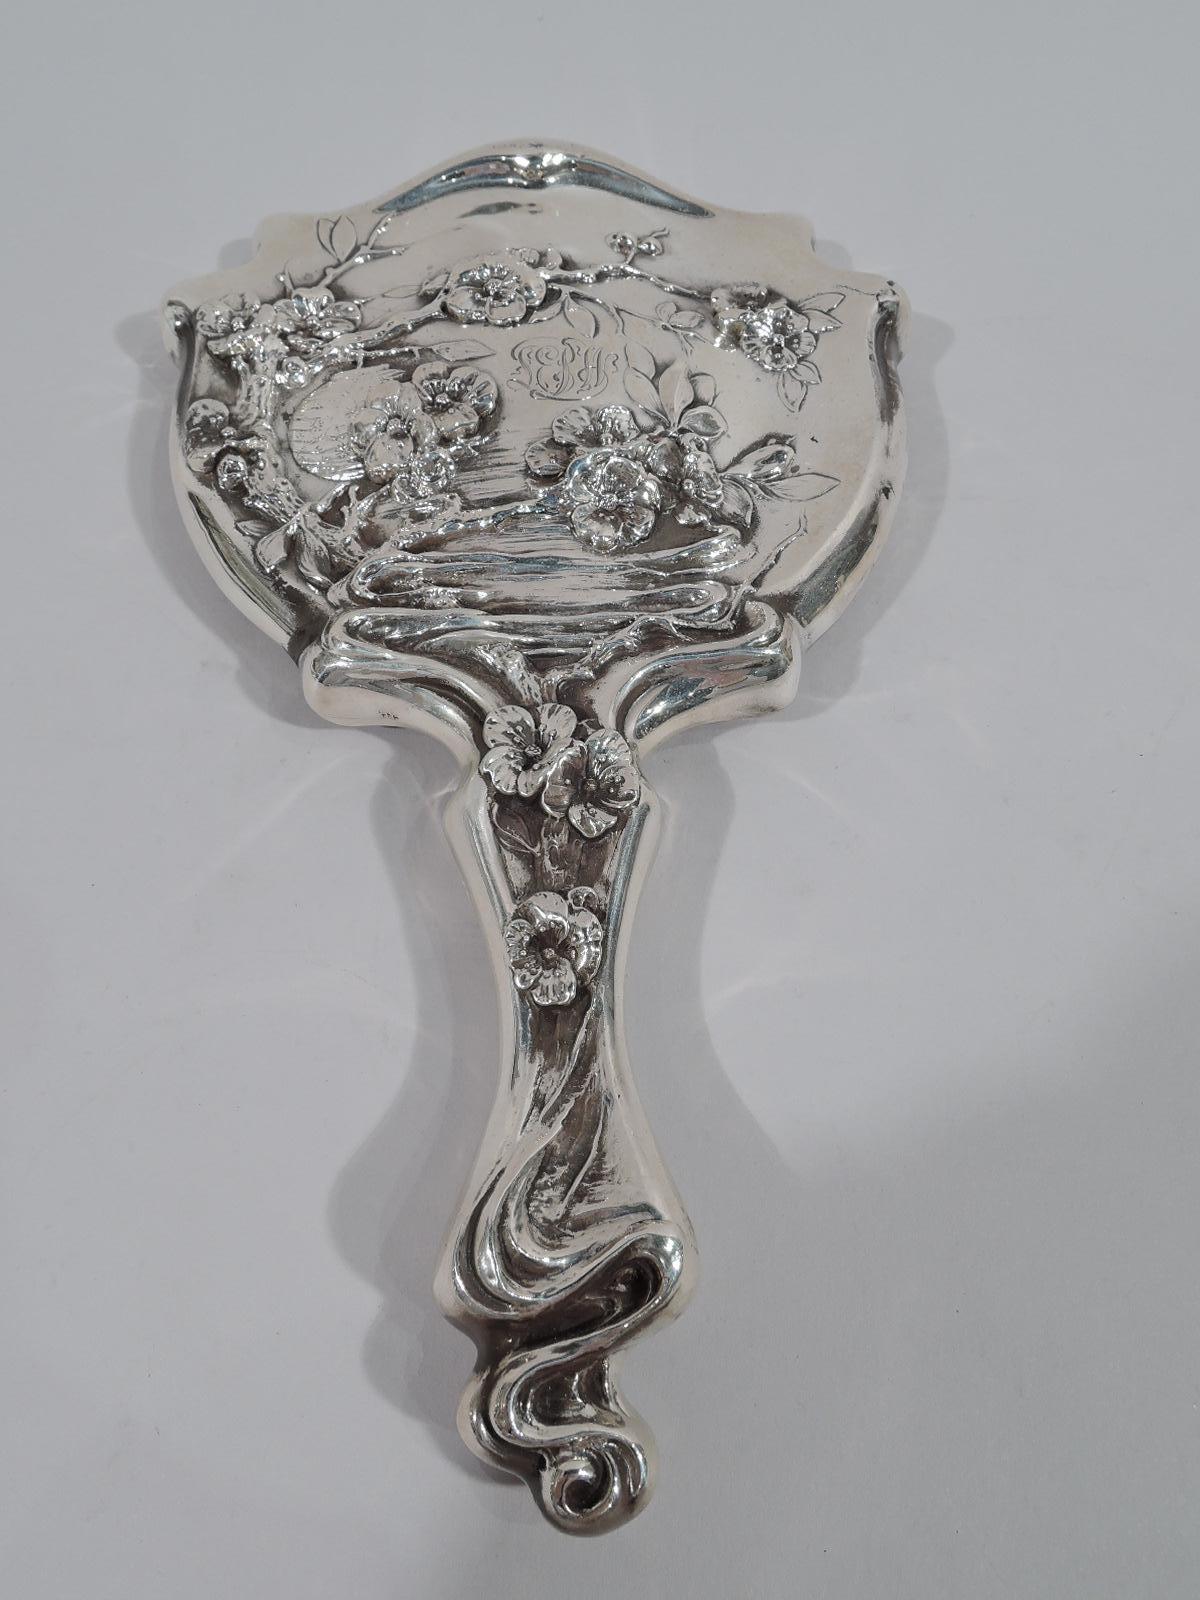 Turn-of-the-century American Japonesque Art Nouveau sterling silver geisha vanity set. This set comprises hand mirror and hair comb. Both are shaped with whiplash curves and blossoming prunus branches. Mirror glass beveled. Mirror back engraved with